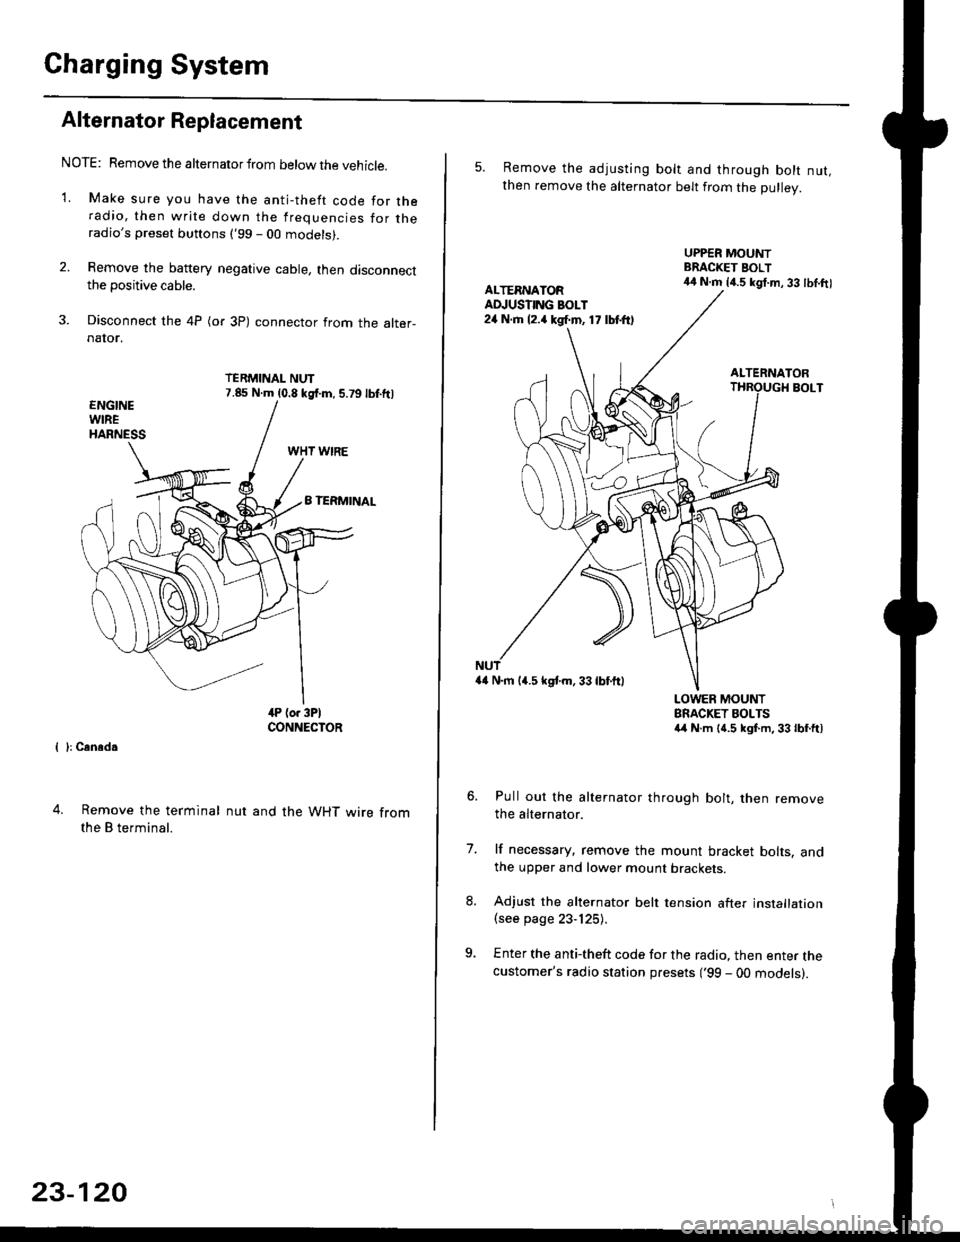 HONDA CIVIC 1996 6.G Workshop Manual Charging System
Alternator Replacement
NOTE: Remove the alternator from below the vehicle.
1. Make sure you have the anti-theft code for theradio, then write down the frequencies for theradios prese